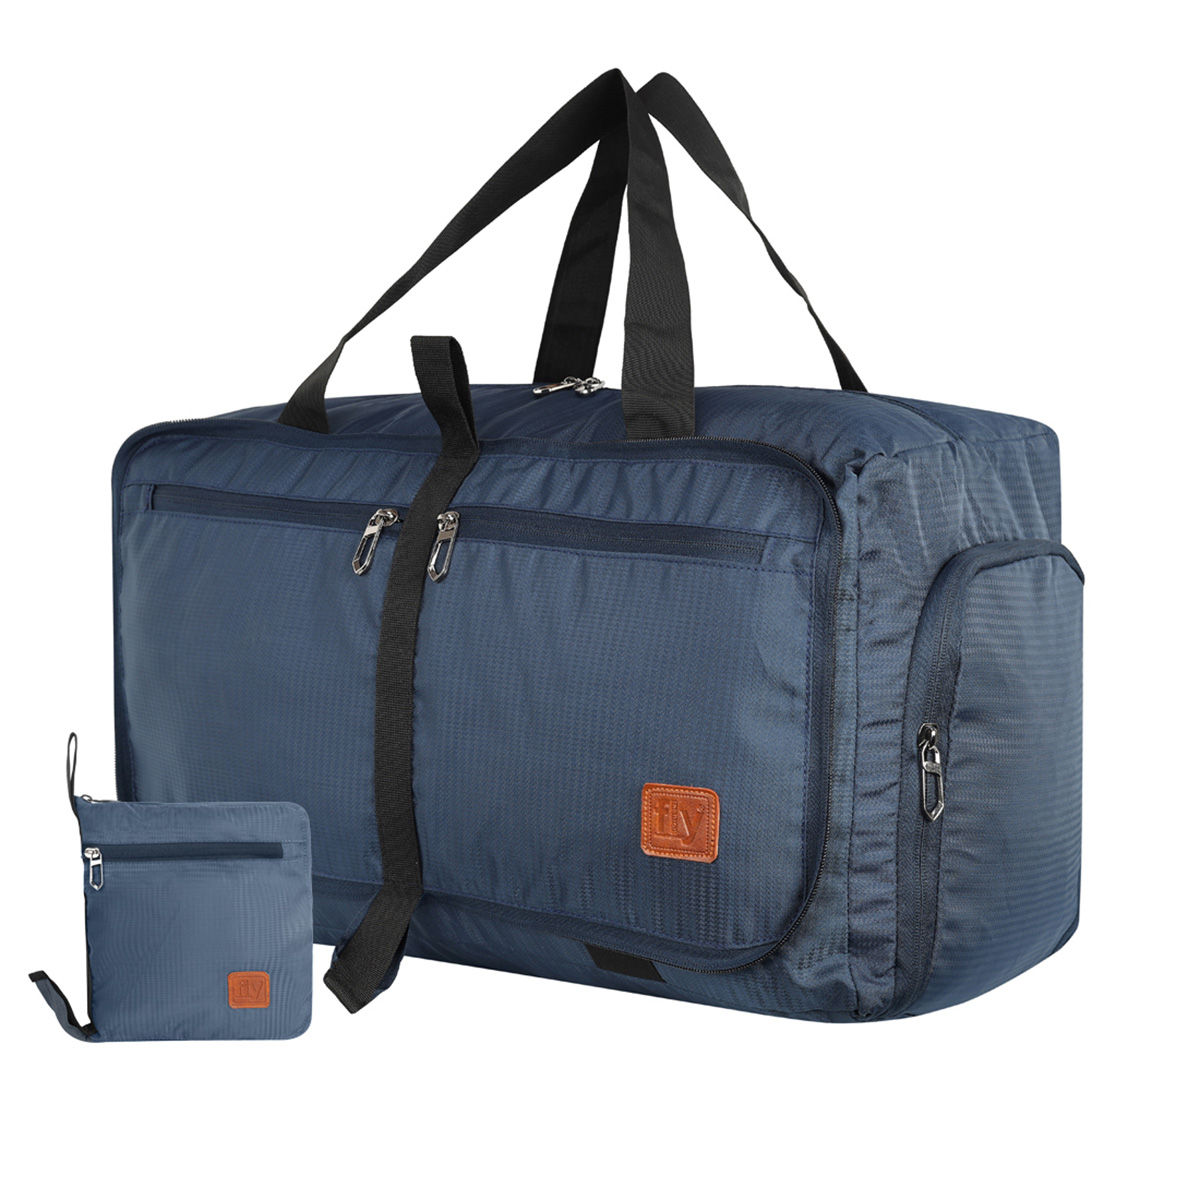 NEW MIX Foldable Duffle Travel Bags